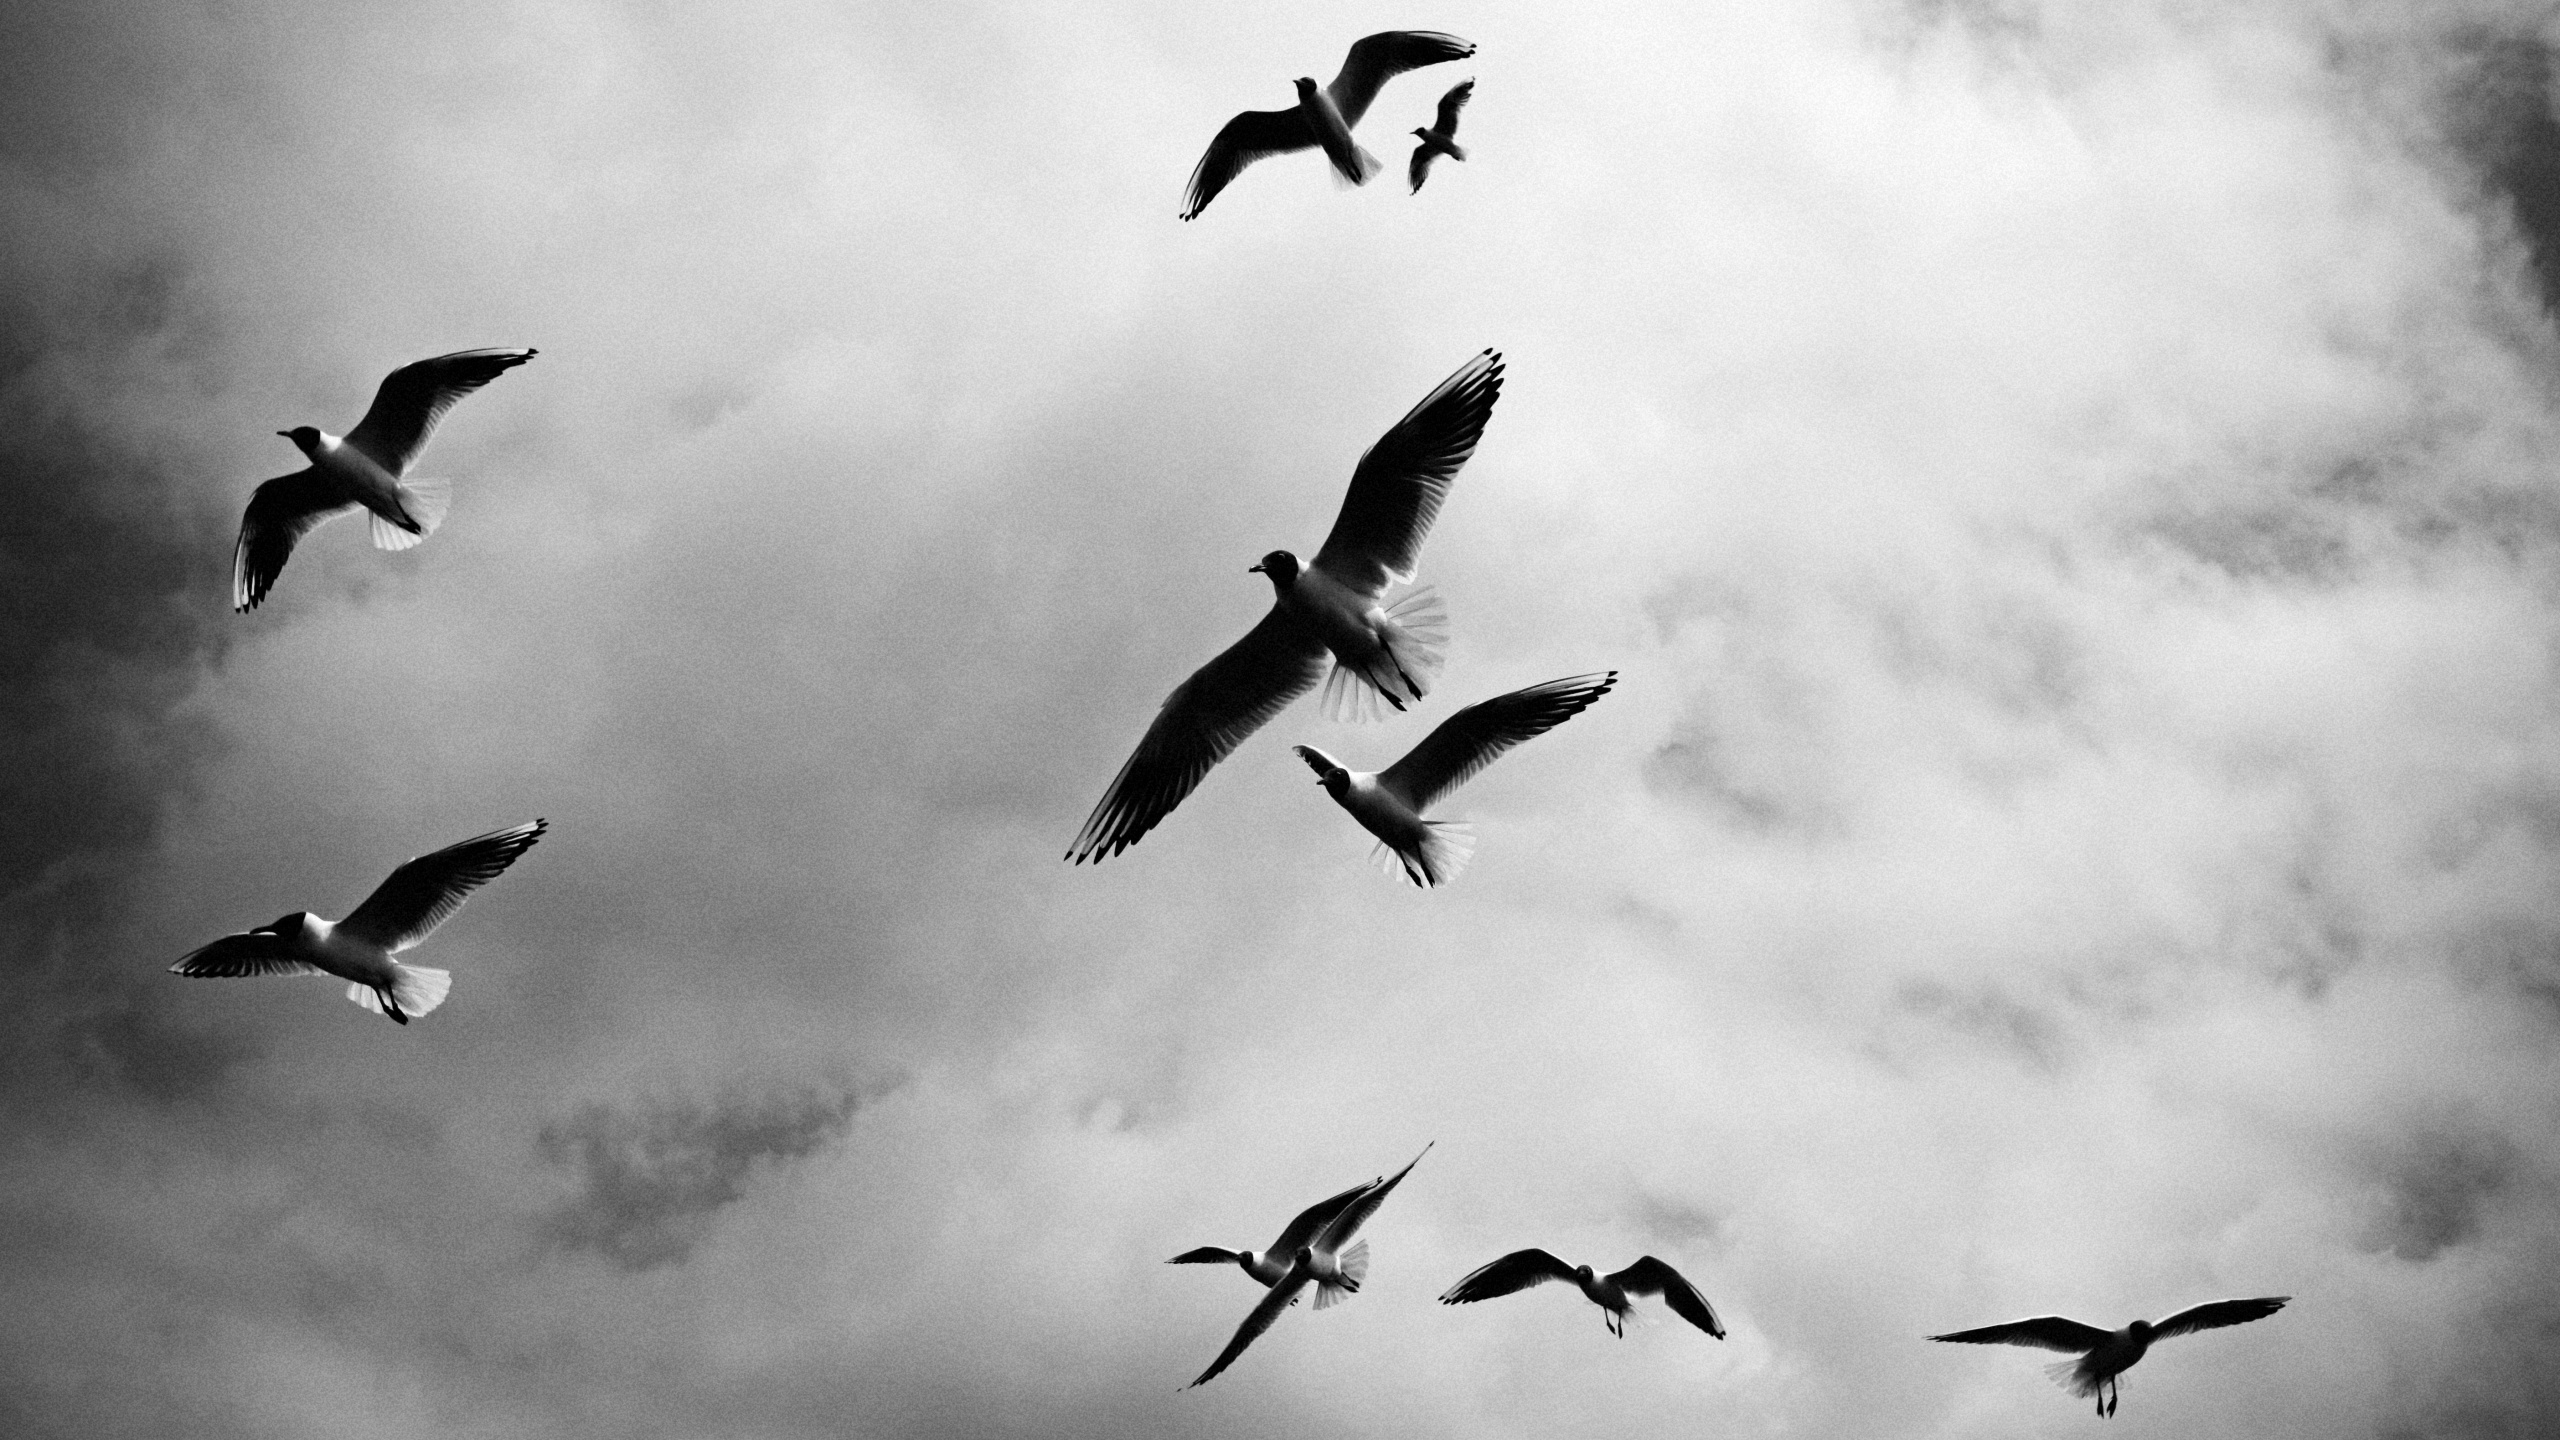 Grayscale Photography of Birds Flying. Wallpaper in 2560x1440 Resolution